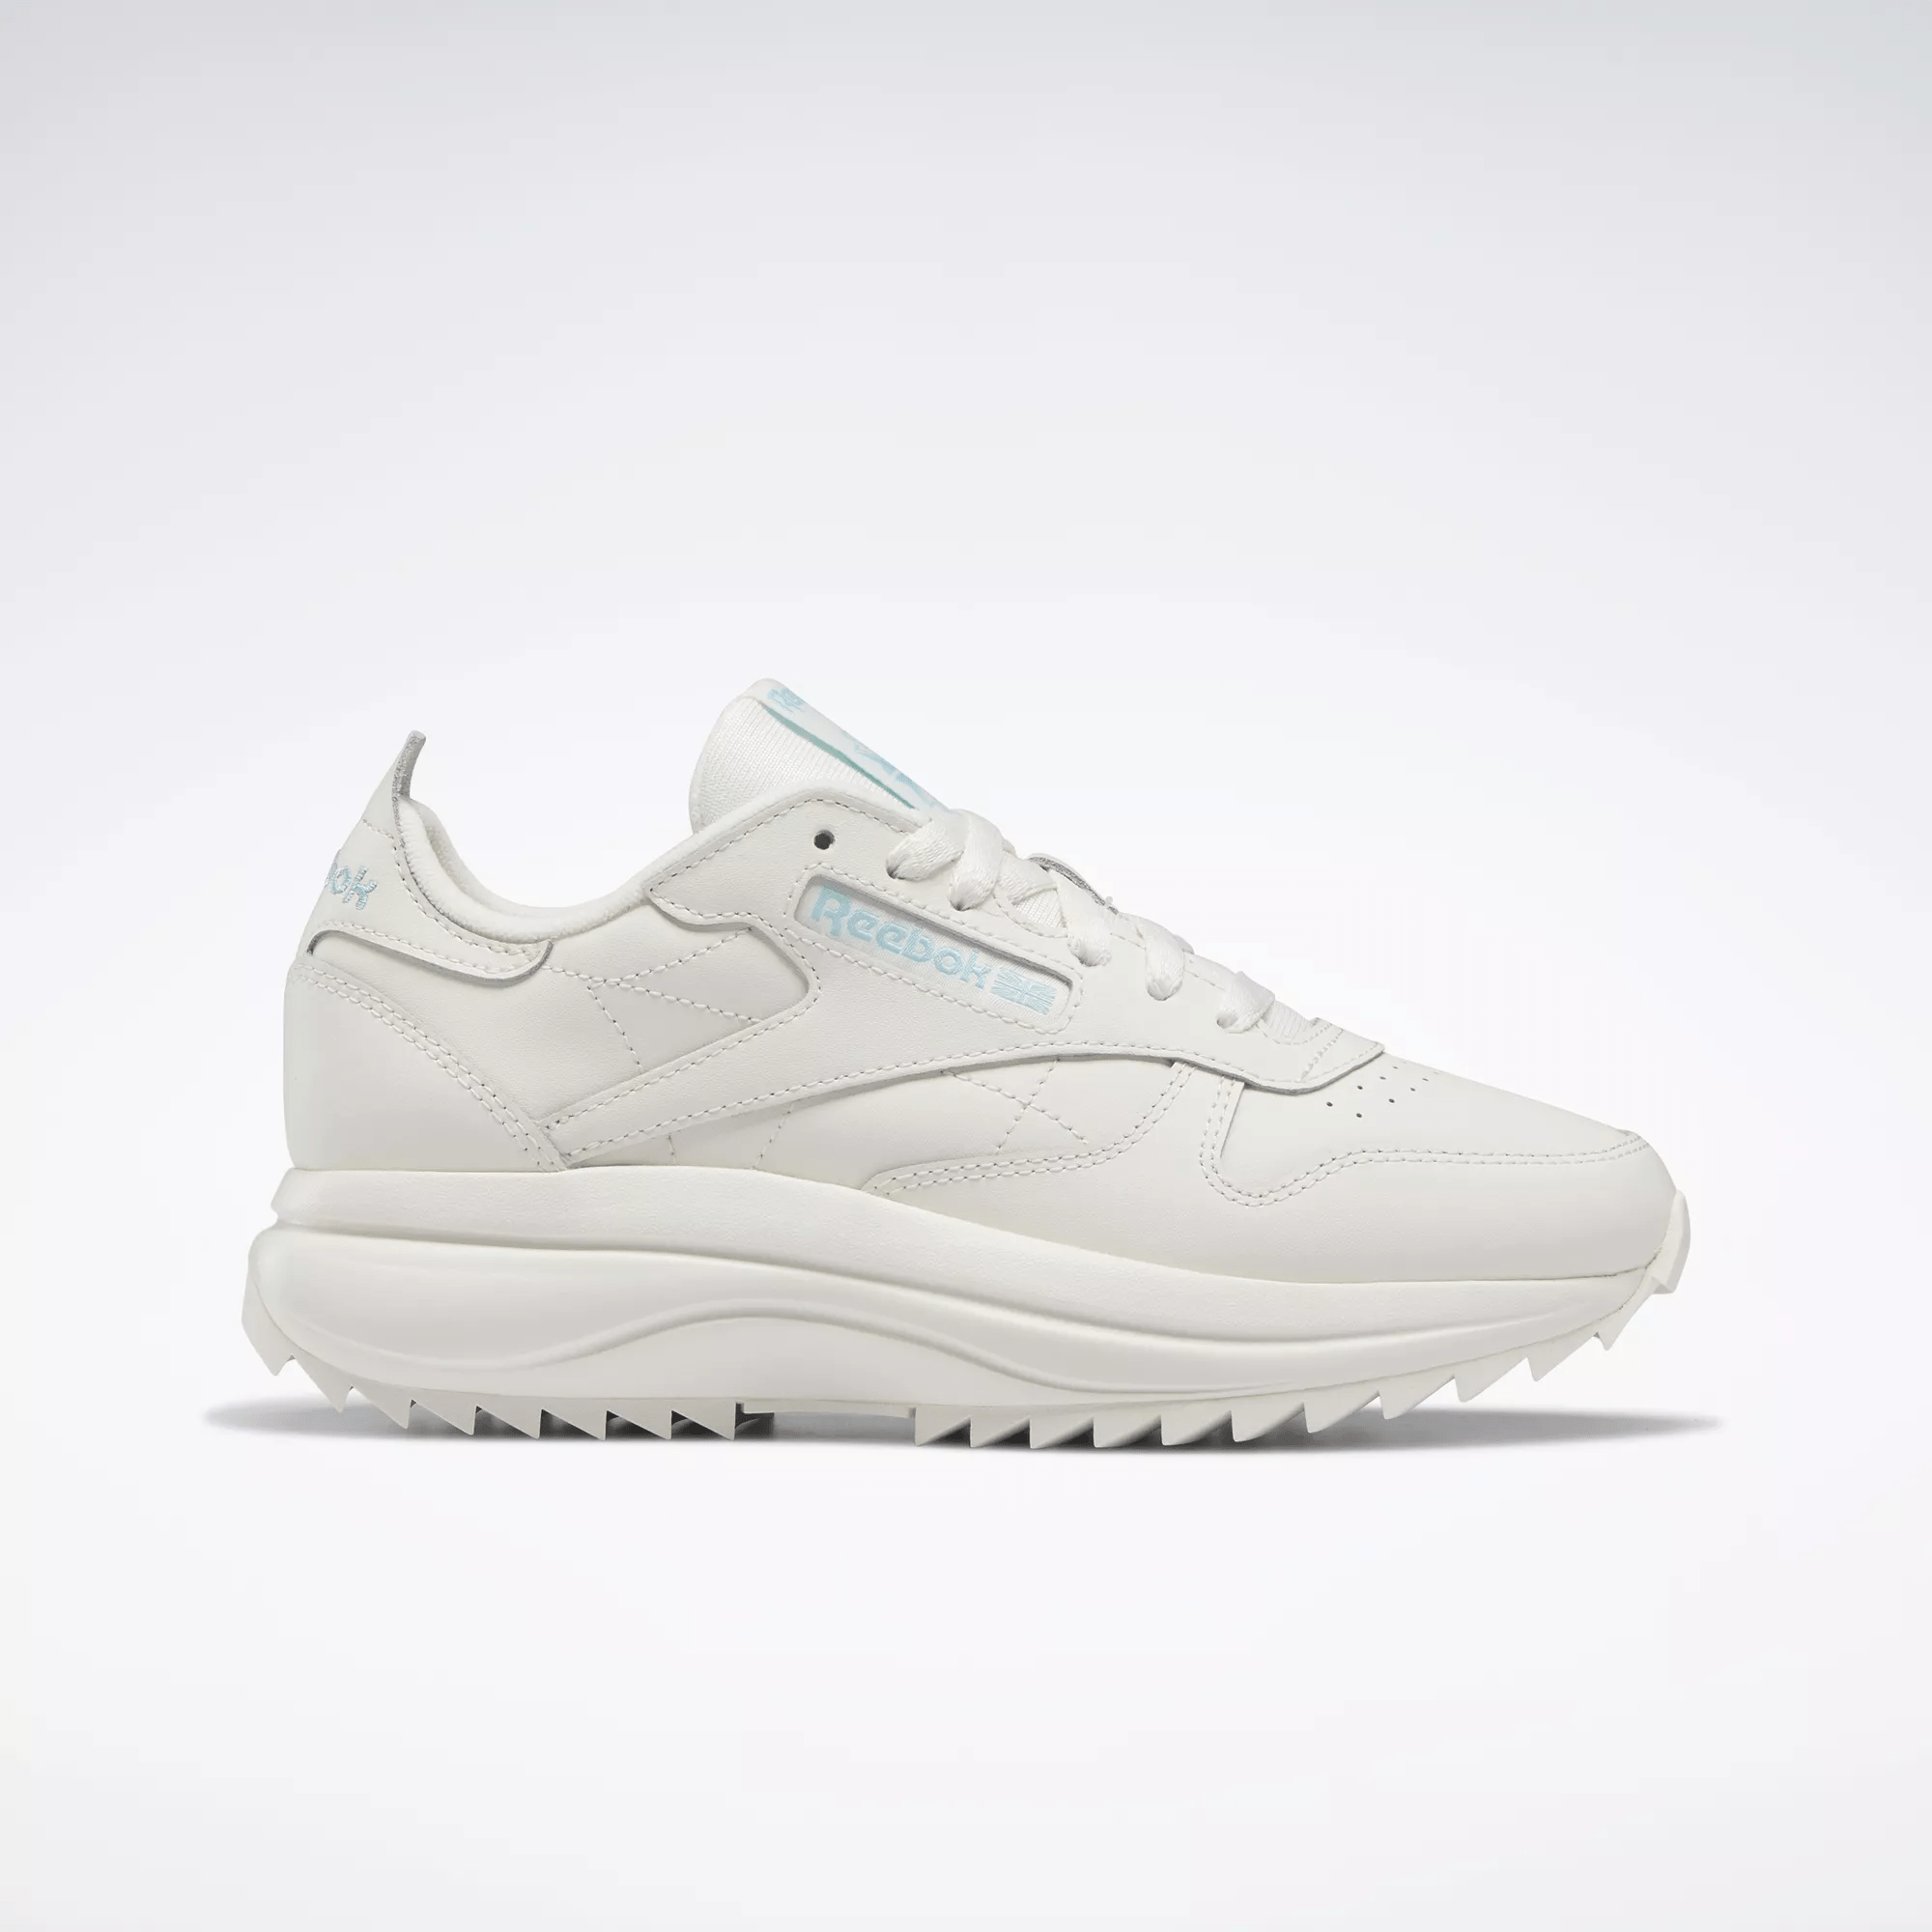 Reebok Classic Leather Sp Extra Women's Shoes In White